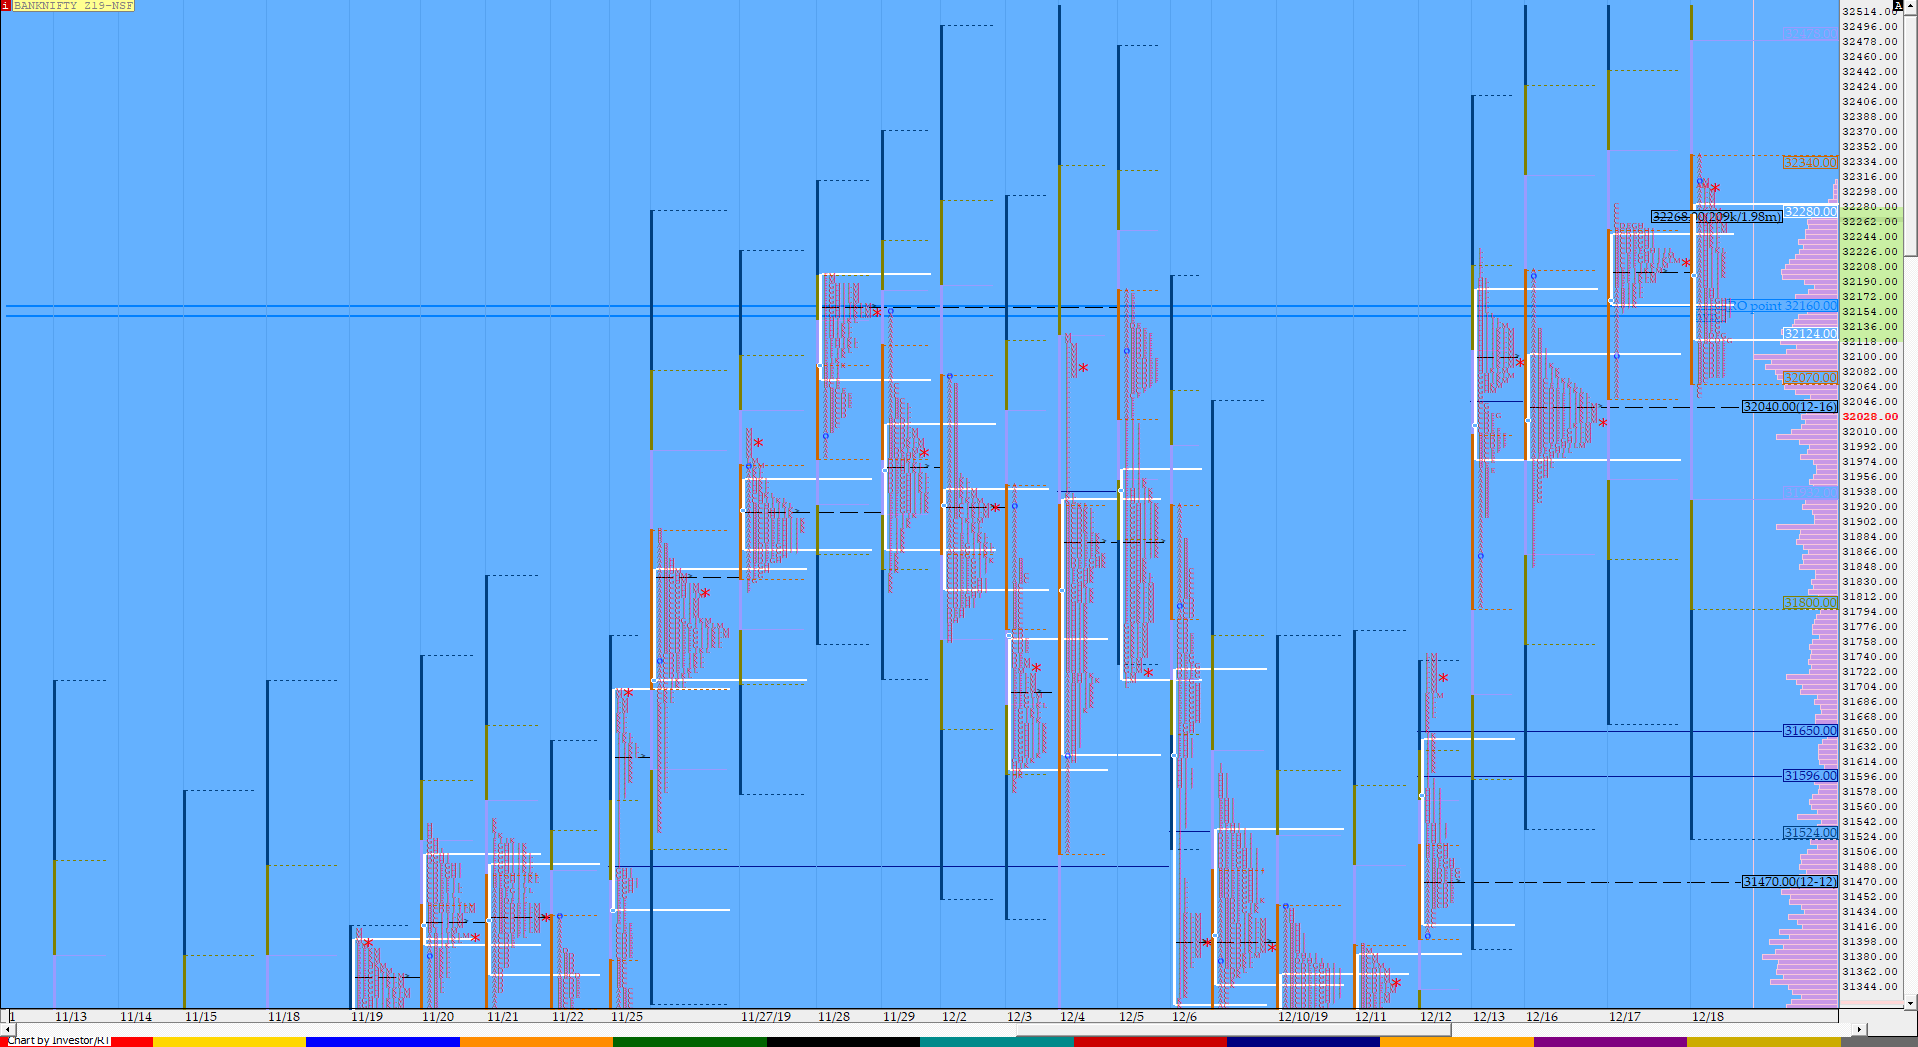 Bnf Compo1 13 Market Profile Analysis Dated 18Th December Banknifty Futures, Charts, Day Trading, Intraday Trading, Intraday Trading Strategies, Market Profile, Market Profile Trading Strategies, Nifty Futures, Order Flow Analysis, Support And Resistance, Technical Analysis, Trading Strategies, Volume Profile Trading